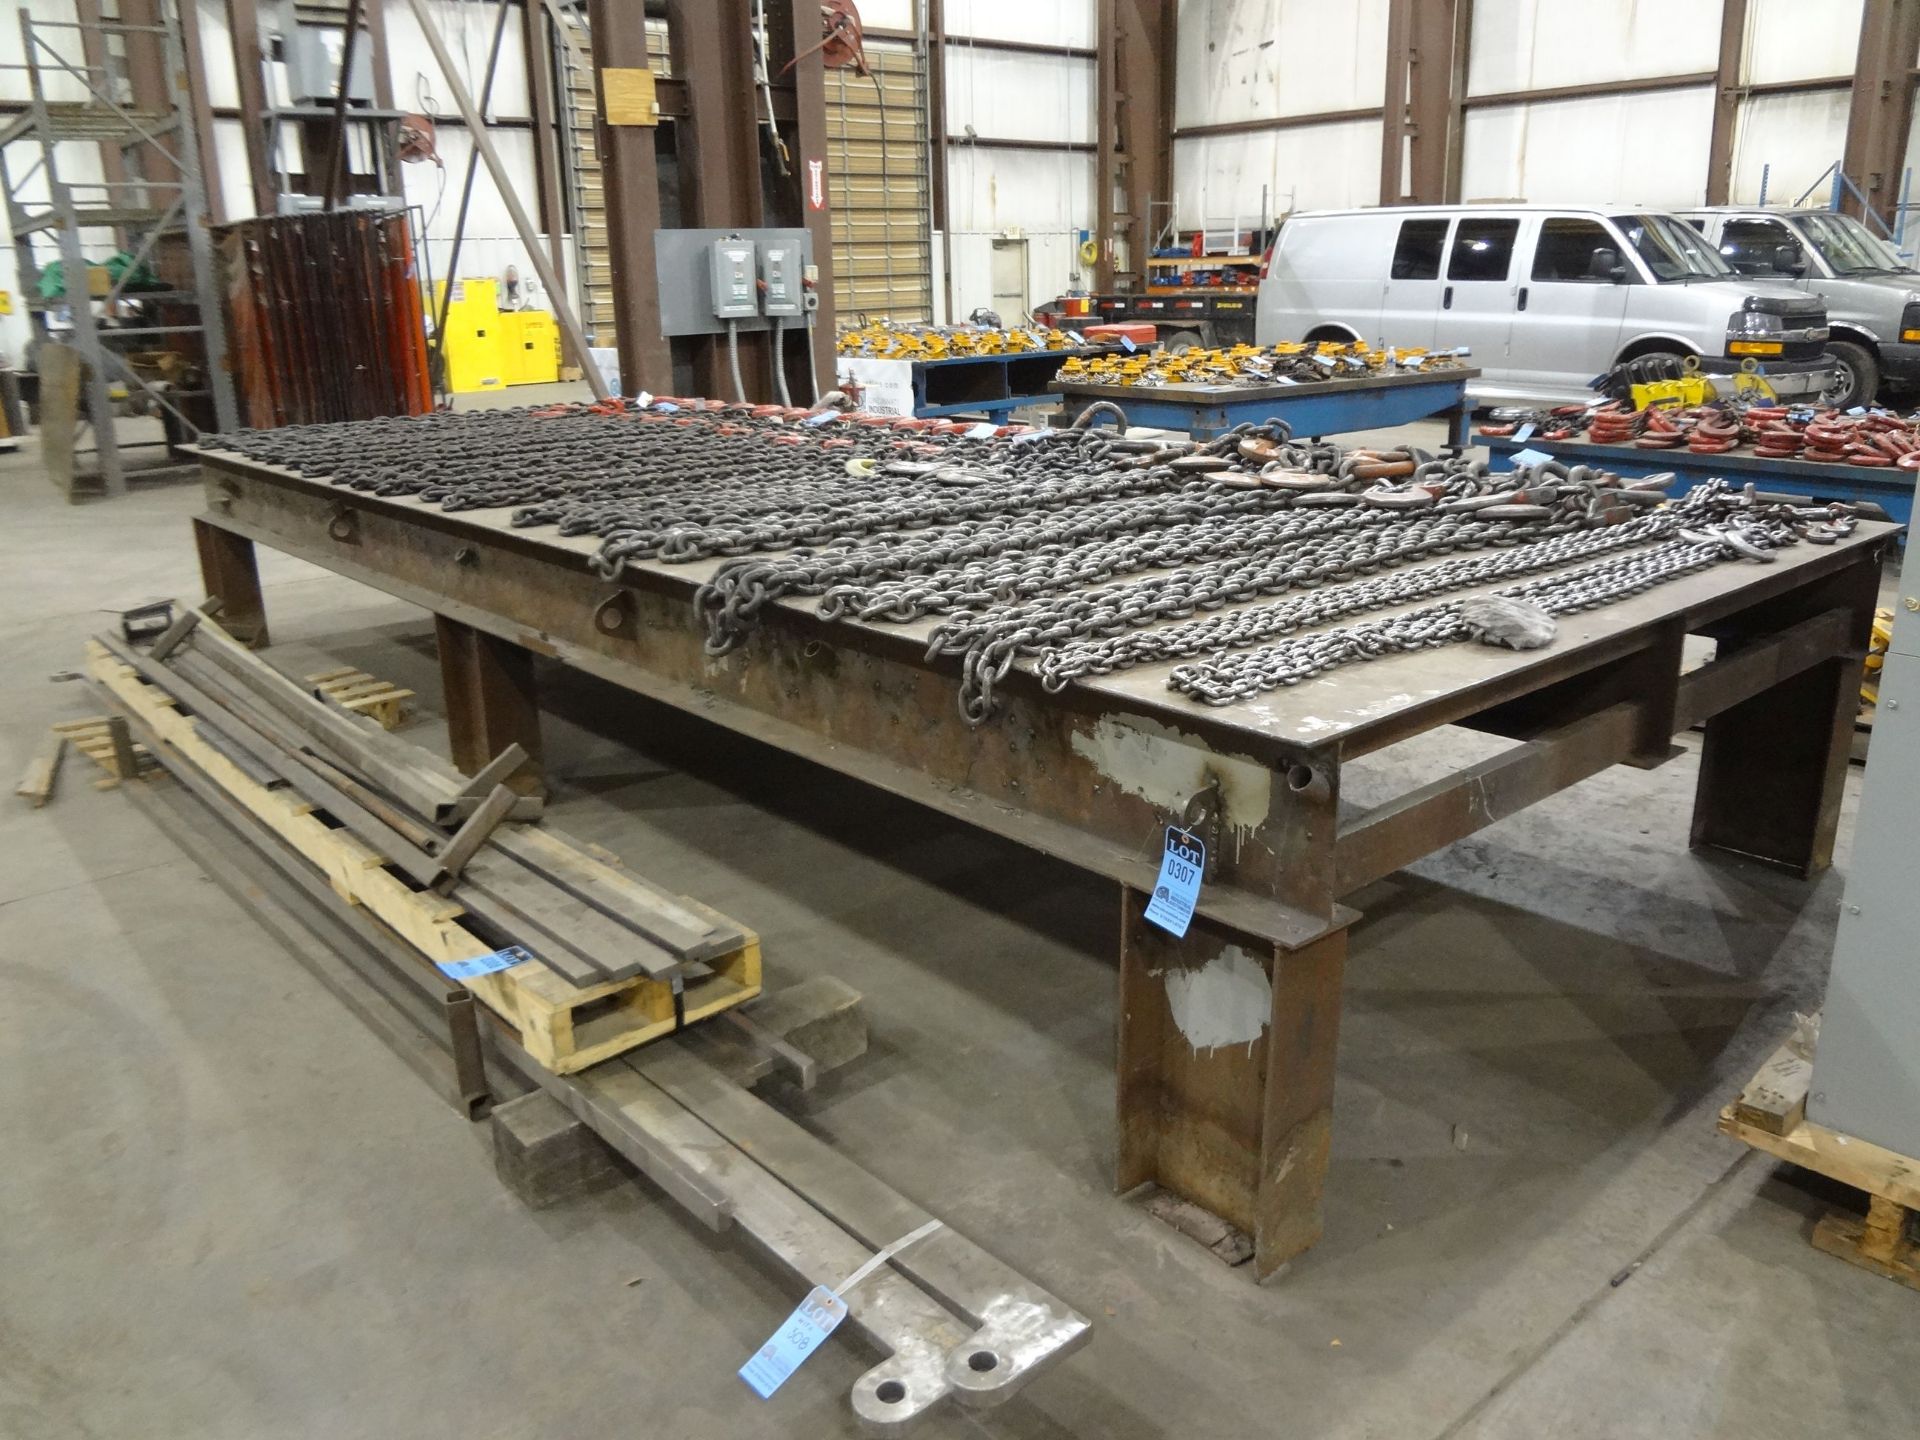 96 1/2" W X 241"L X 36"H X 3/8" THICK STEEL TOP PLATE SHOP FABRICATED WELDED STEEL FRAME LAY-OUT